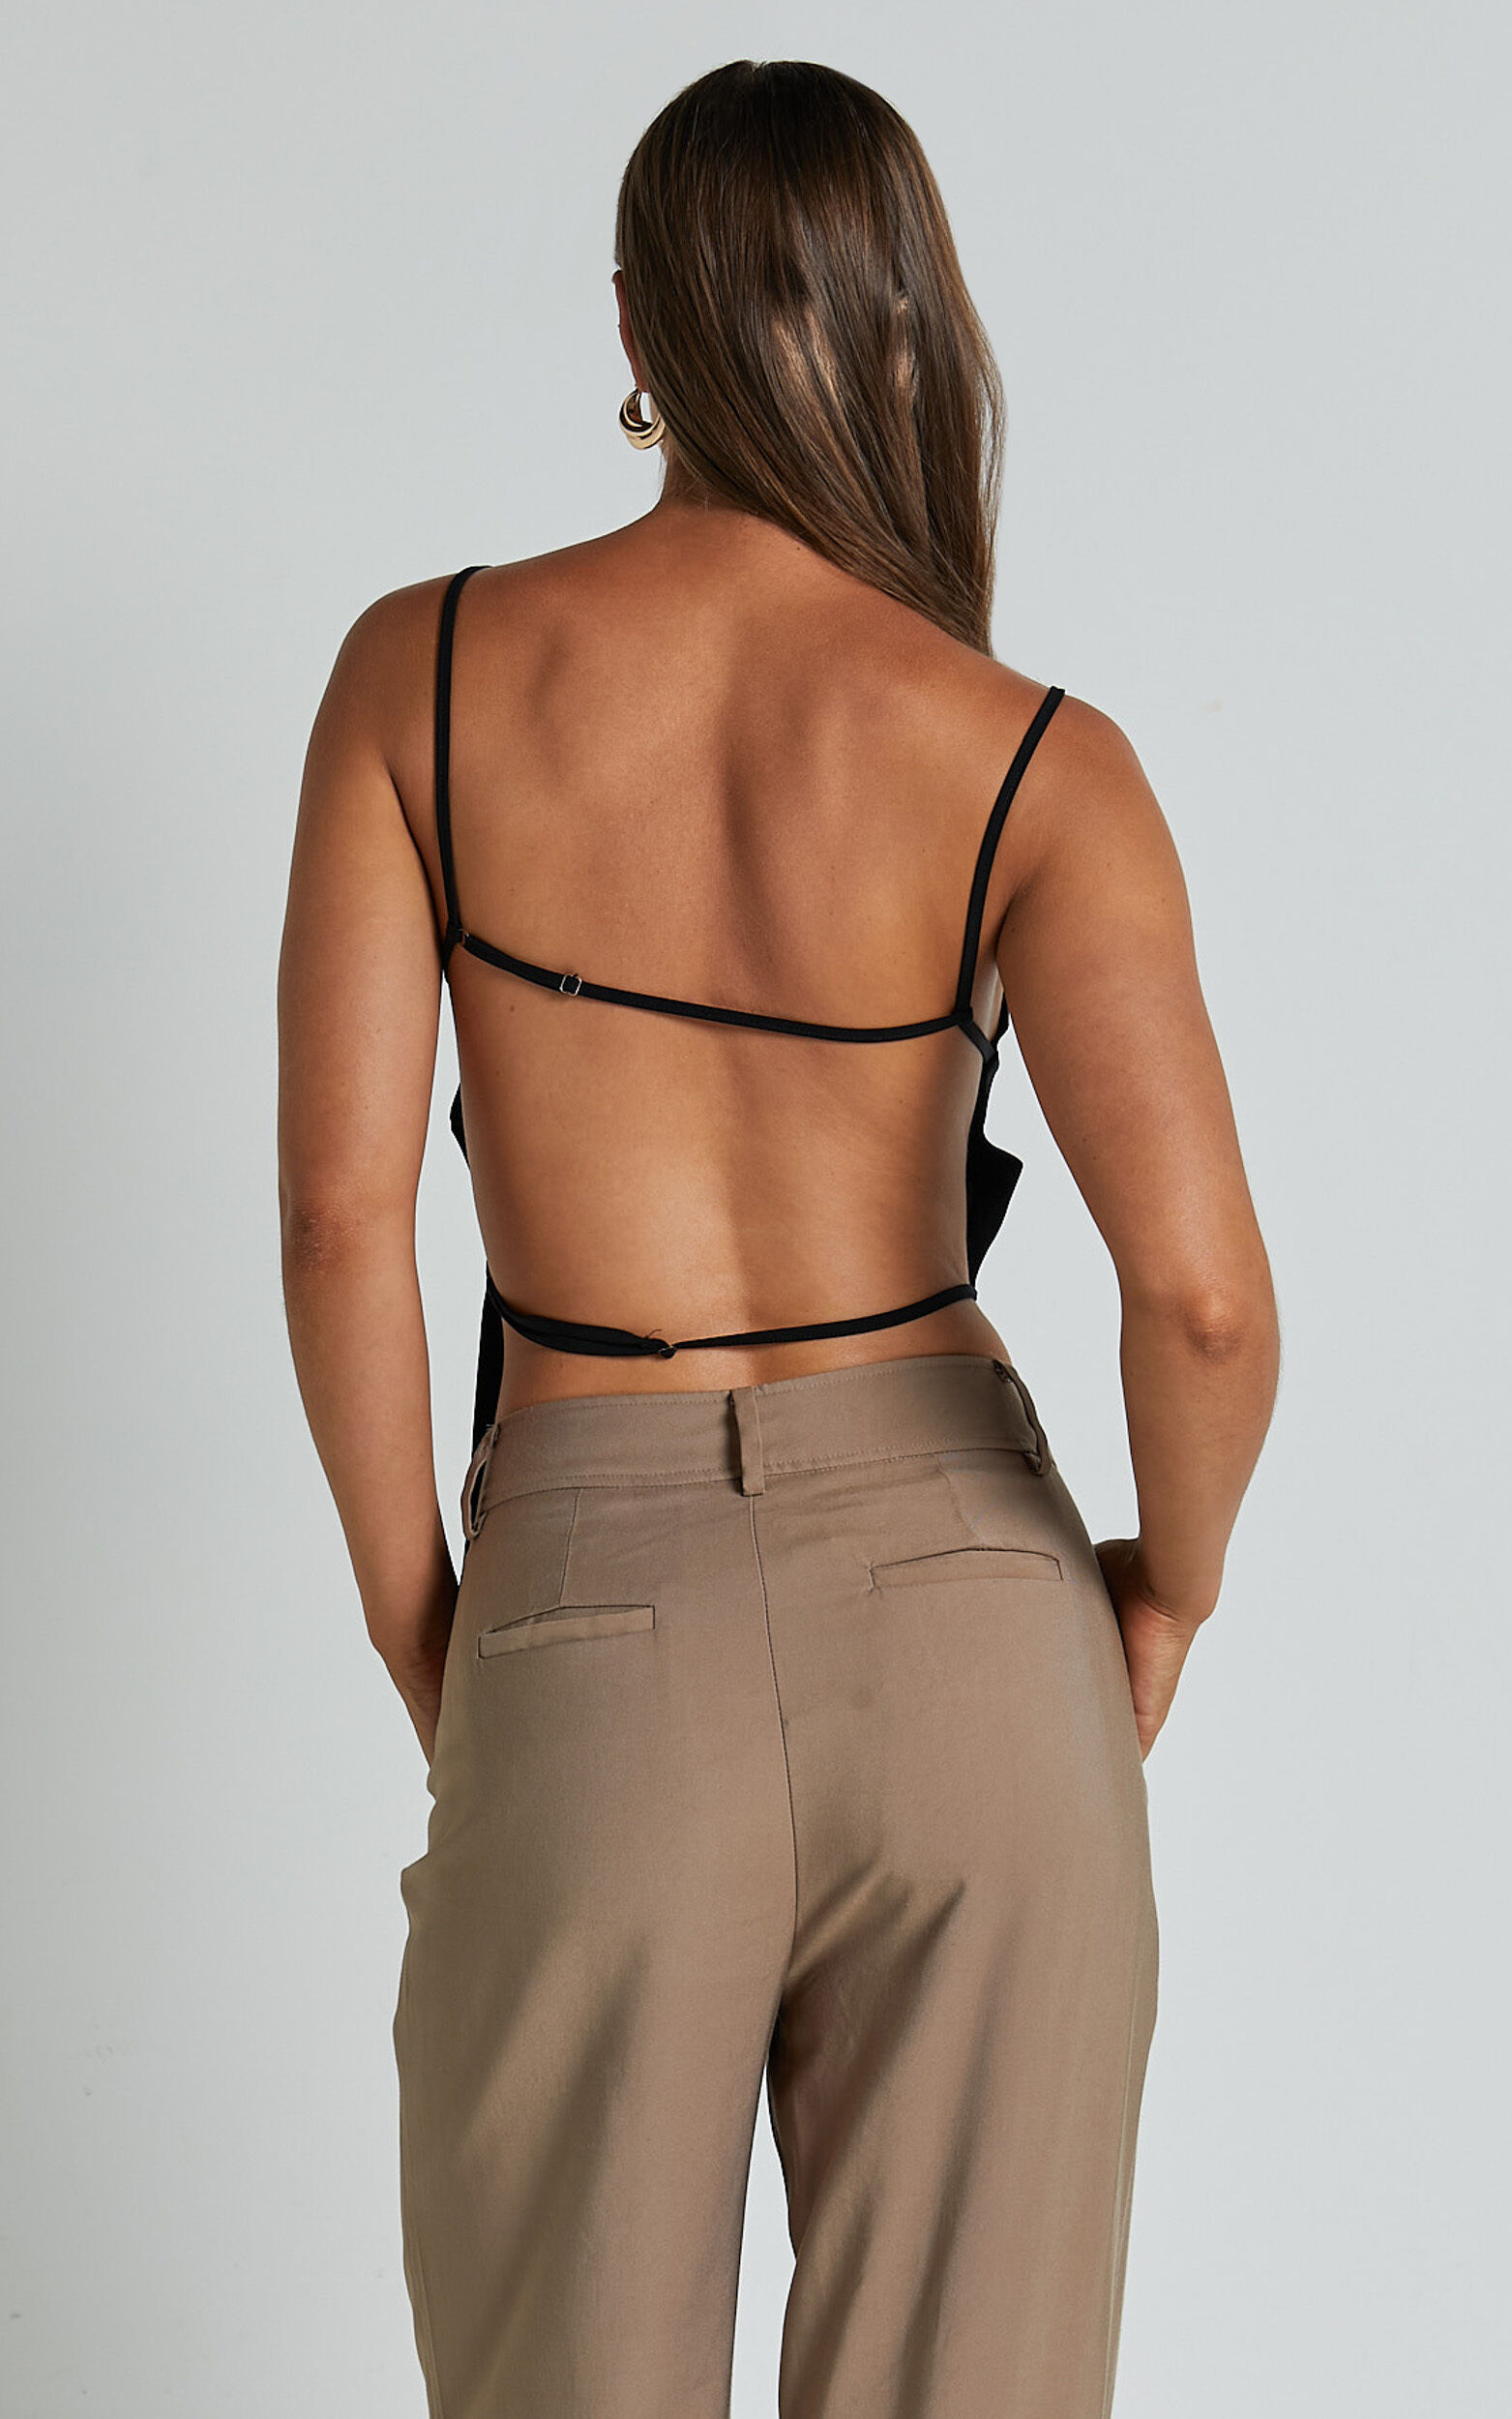 LIONESS - CAMILLE BACKLESS TOP in ONYX